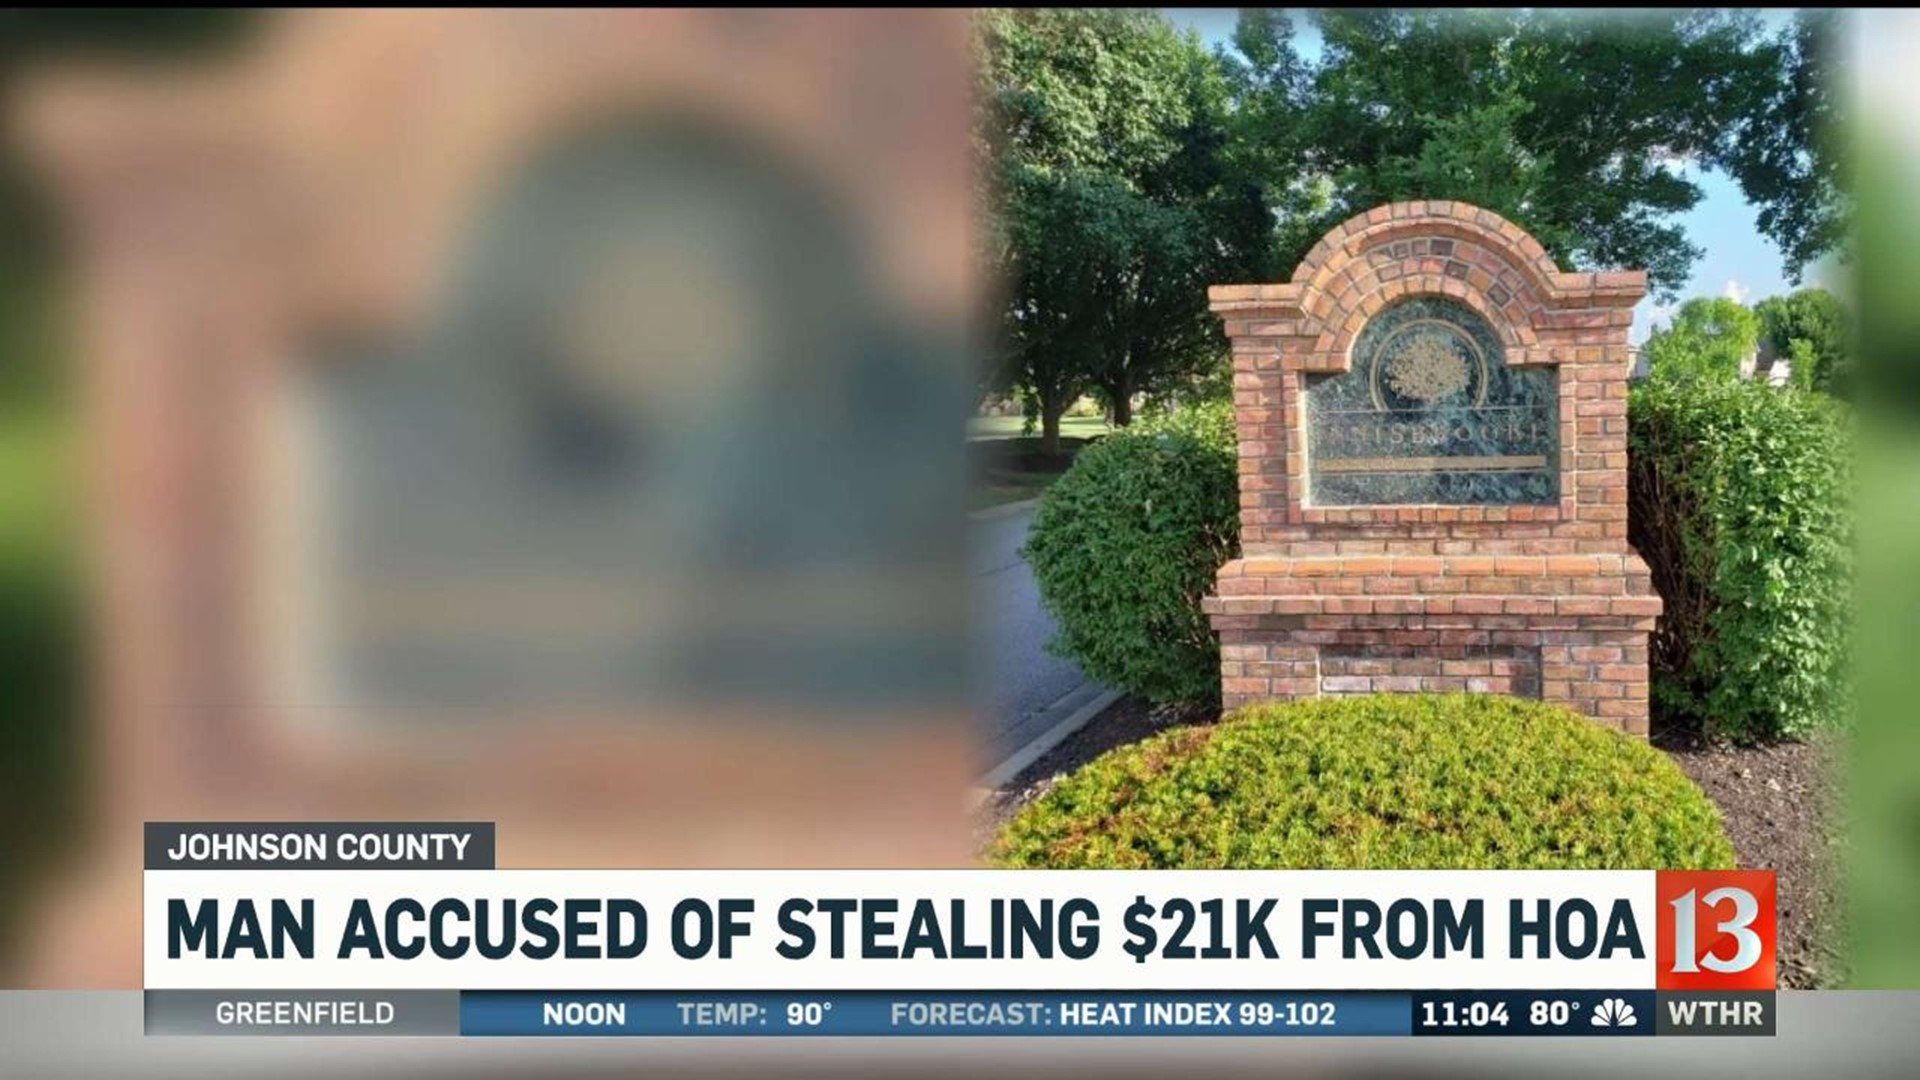 Man Accused of Stealing $21K from HOA in Johnson County